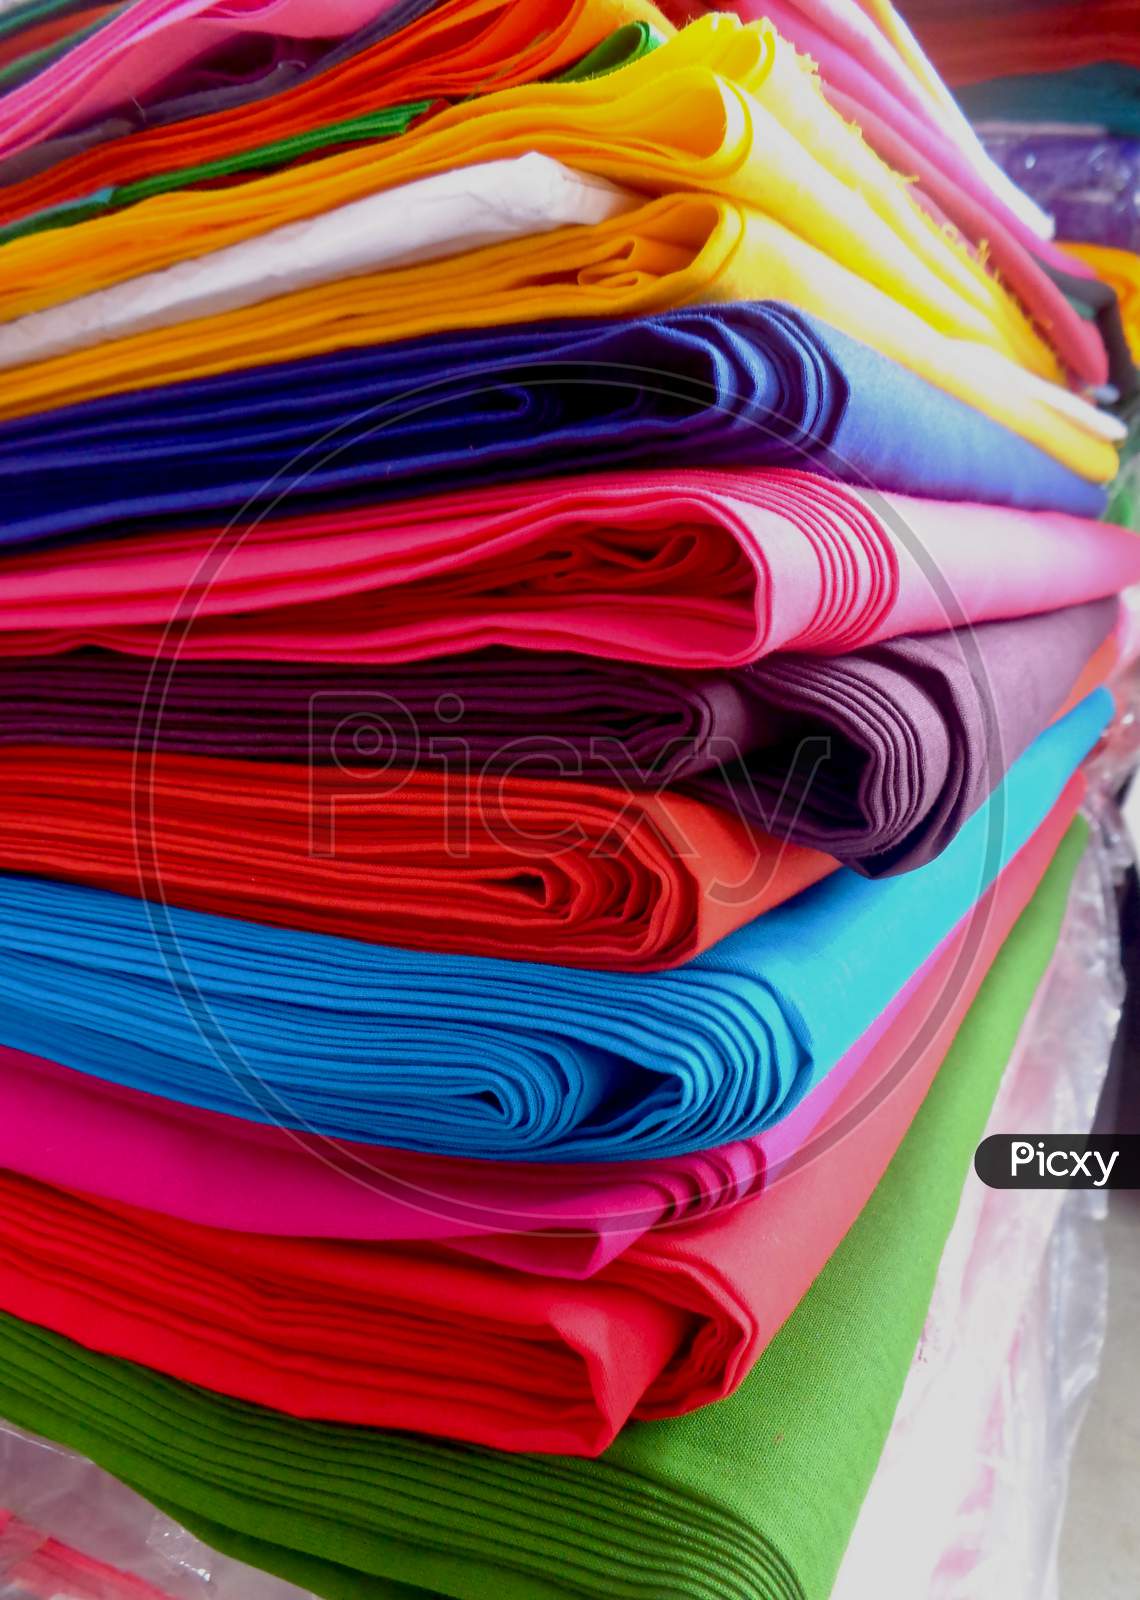 Bundles Of Colorful Cloth Arranged By Folding